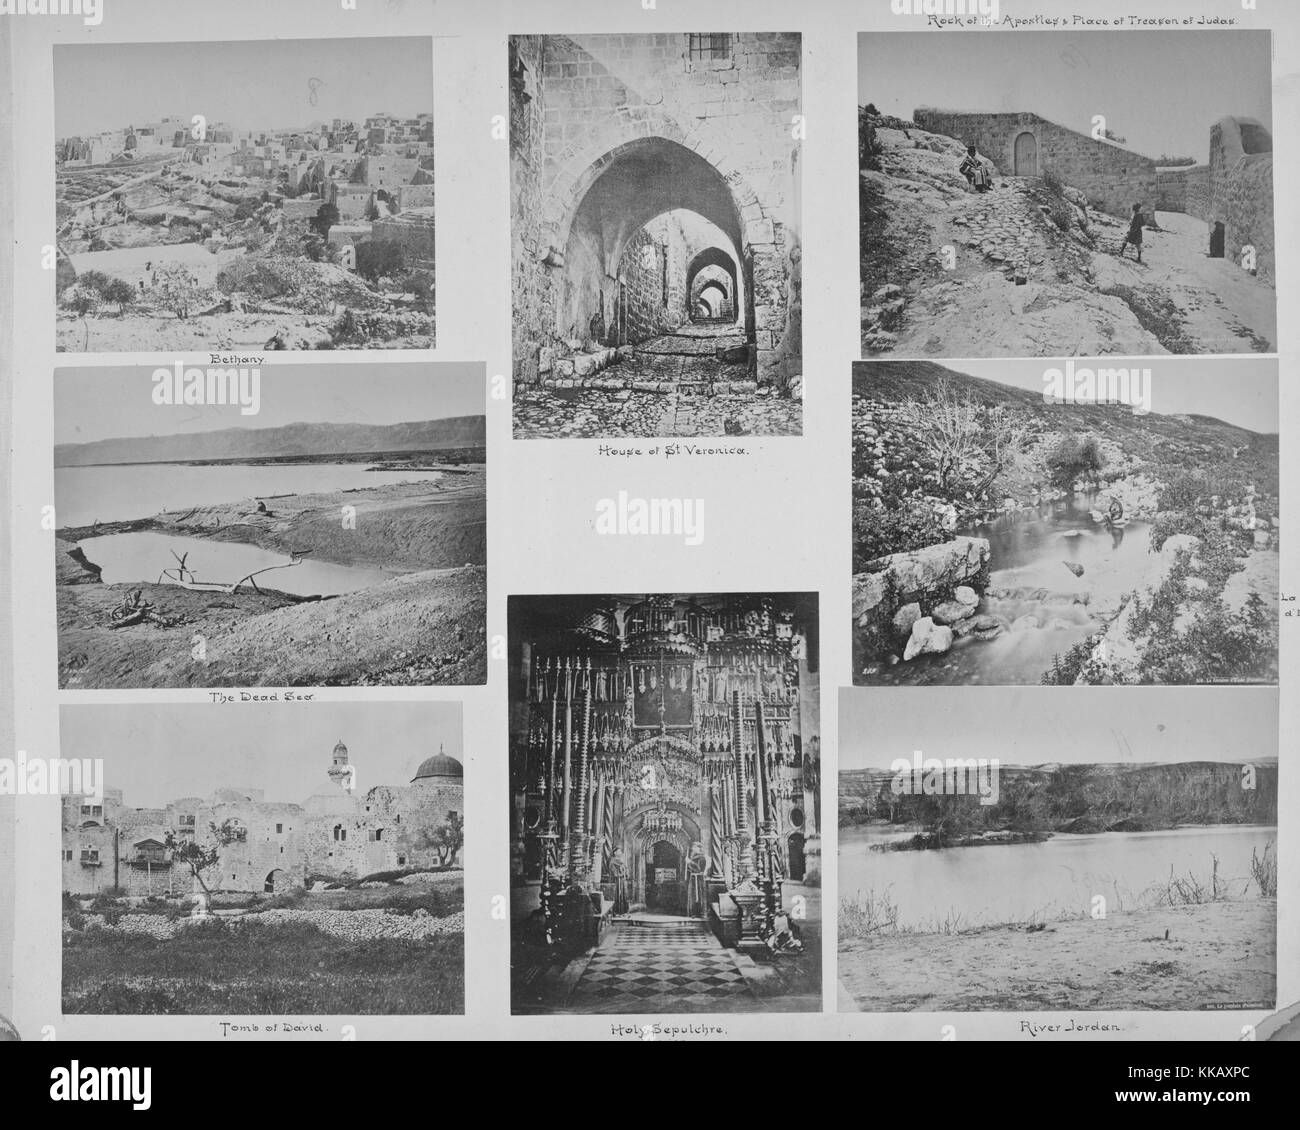 A collection of photographs that are mostly from Israel, starting from the top left and moving clockwise they are - Bethany, The House of St. Veronica, Rock of the apostles and the place of the betrayal by Judas, Fountain of Elisha, River Jordan, Holy Sepulchre, Tomb of David, and The Dead Sea, 1900. From the New York Public Library. Stock Photo